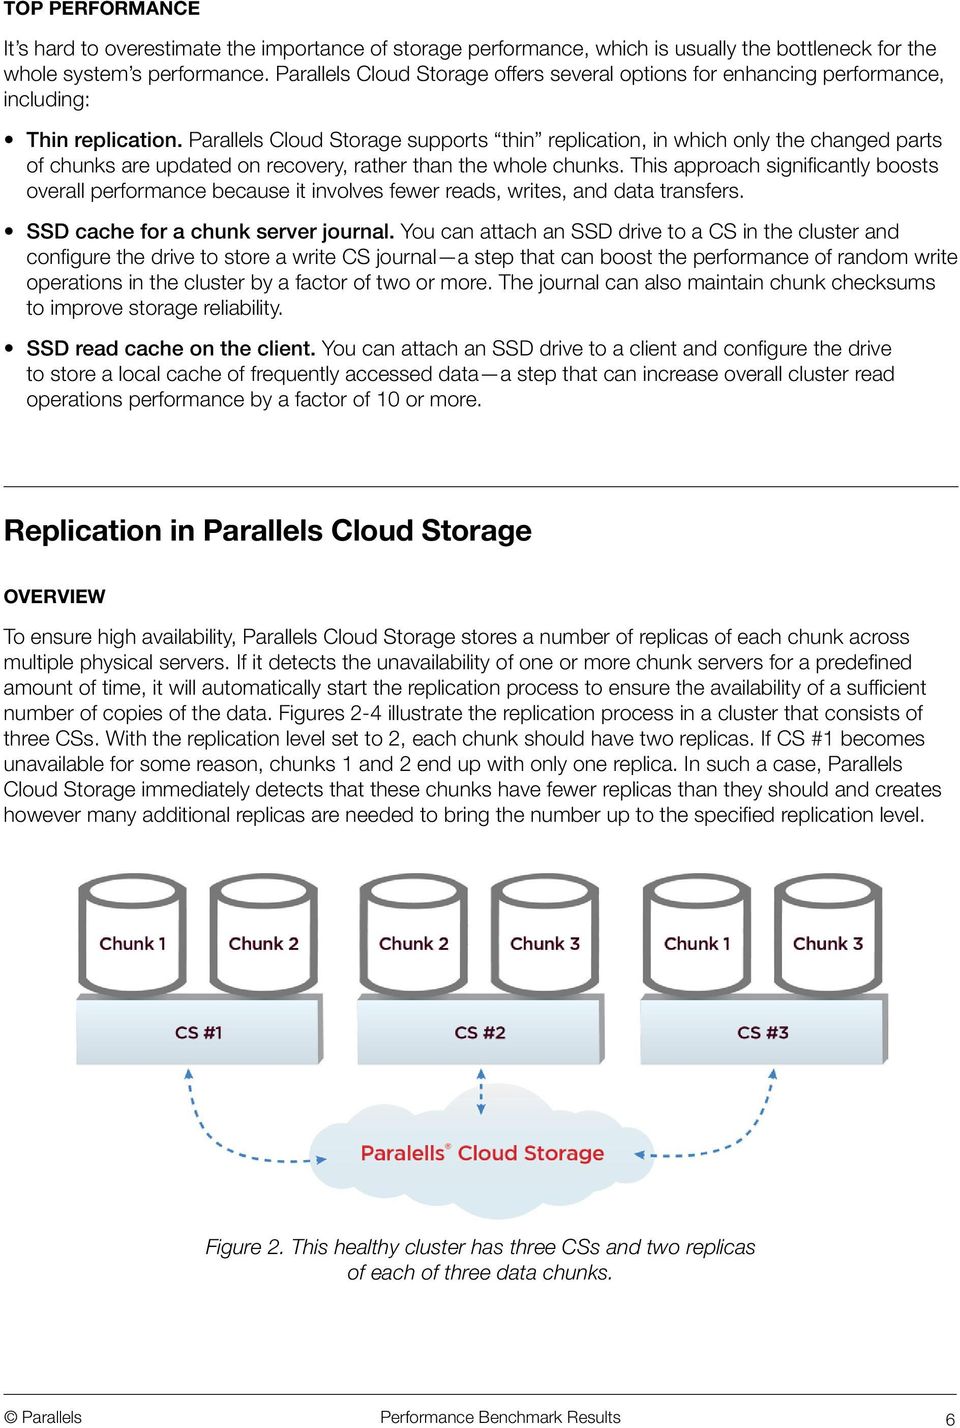 Parallels Cloud Storage supports thin replication, in which only the changed parts of chunks are updated on recovery, rather than the whole chunks.